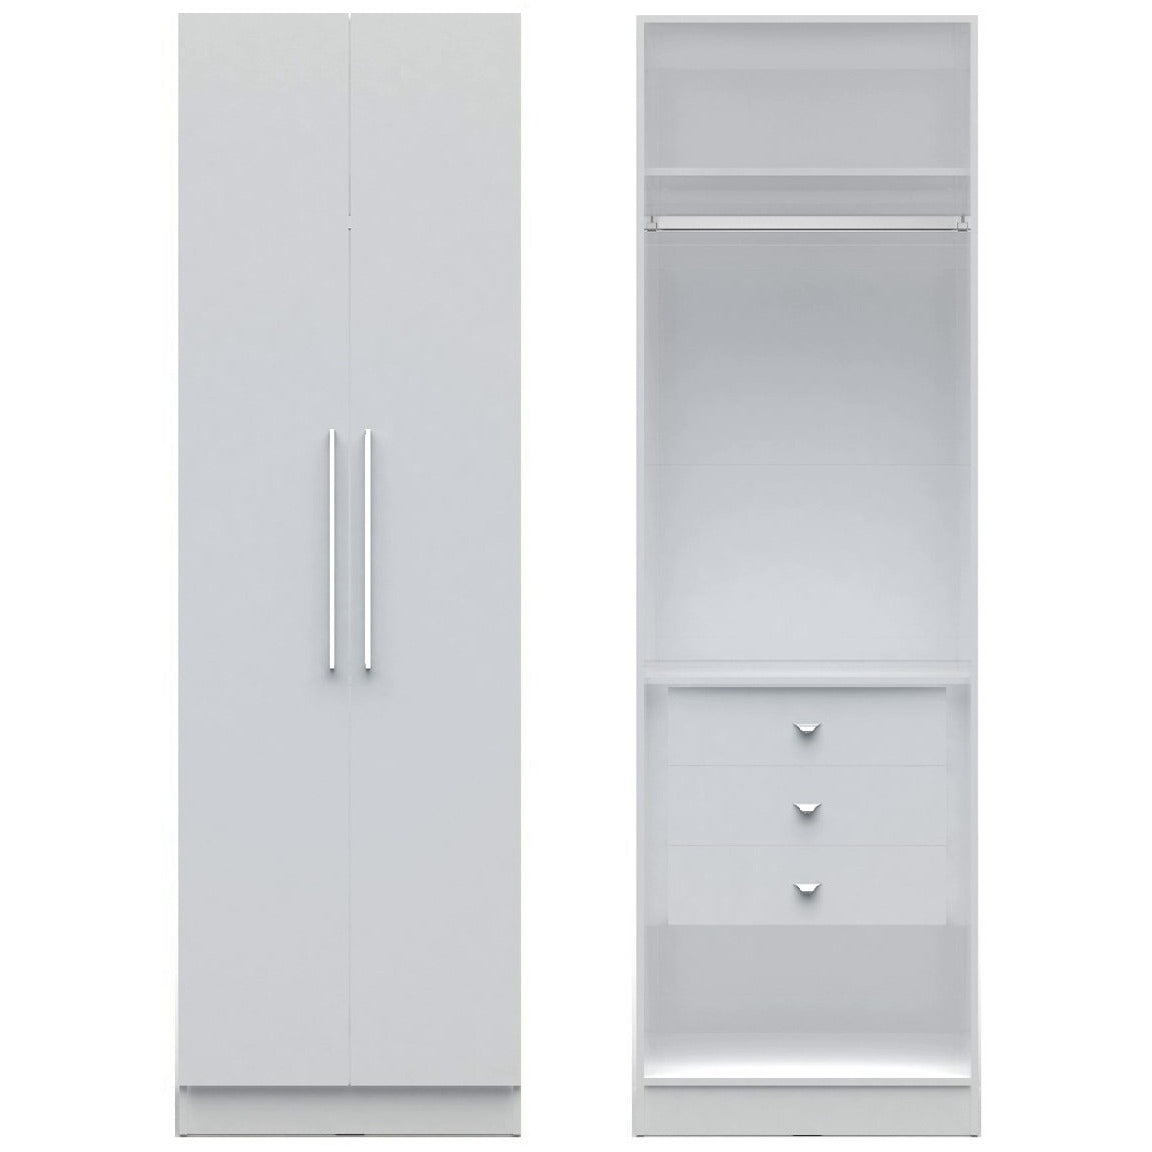 Manhattan Comfort Chelsea 1.0 - 27.55 inch Wide Basic Wardrobe Closet with 3 Drawers and 2 Doors in White-Minimal & Modern